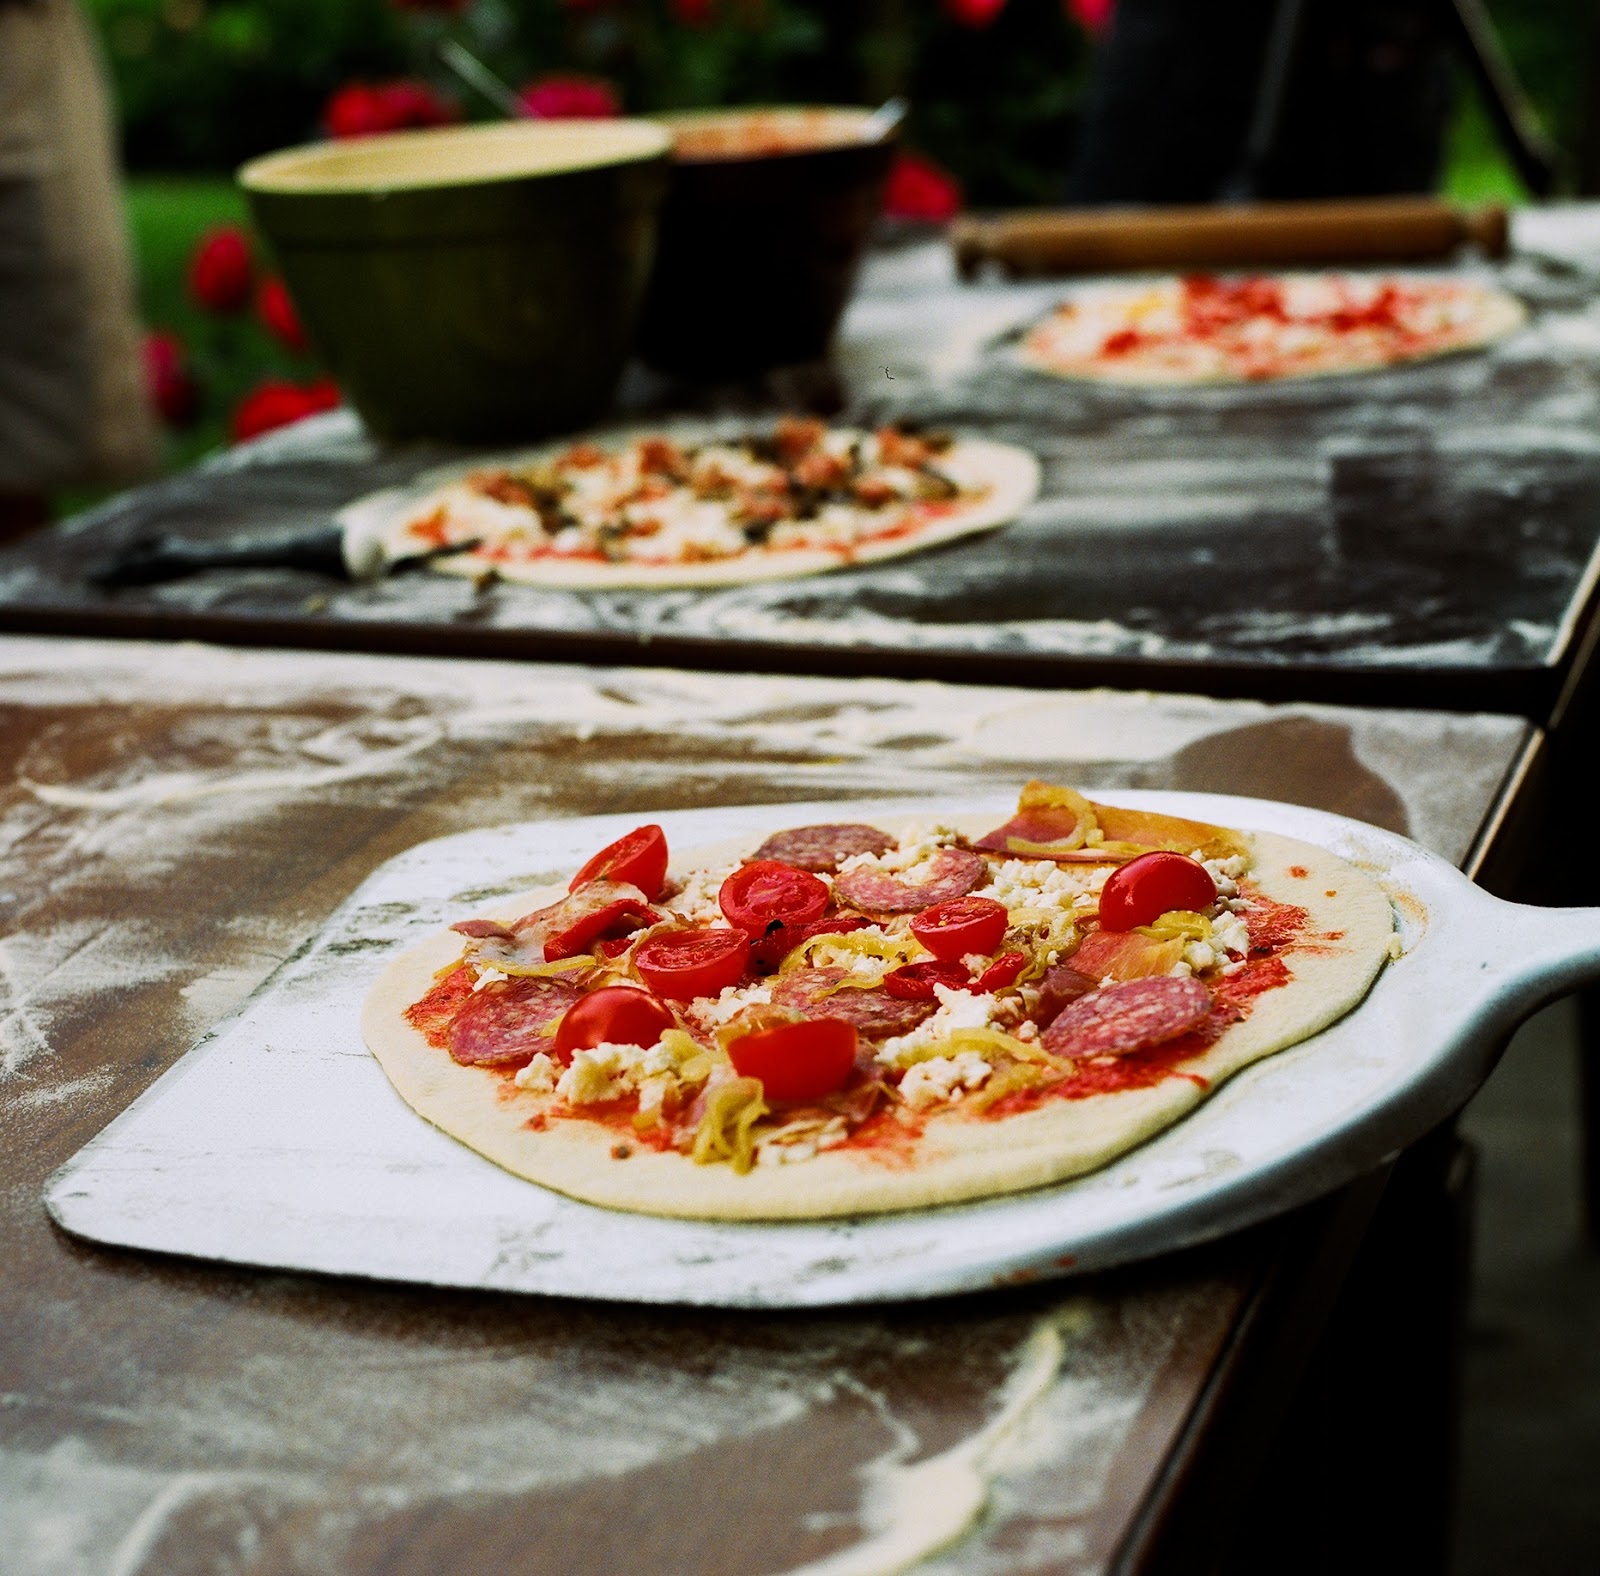 ... : Pizza Dough Recipe &amp; Podcast on Making Pizza in a Wood Burning Oven